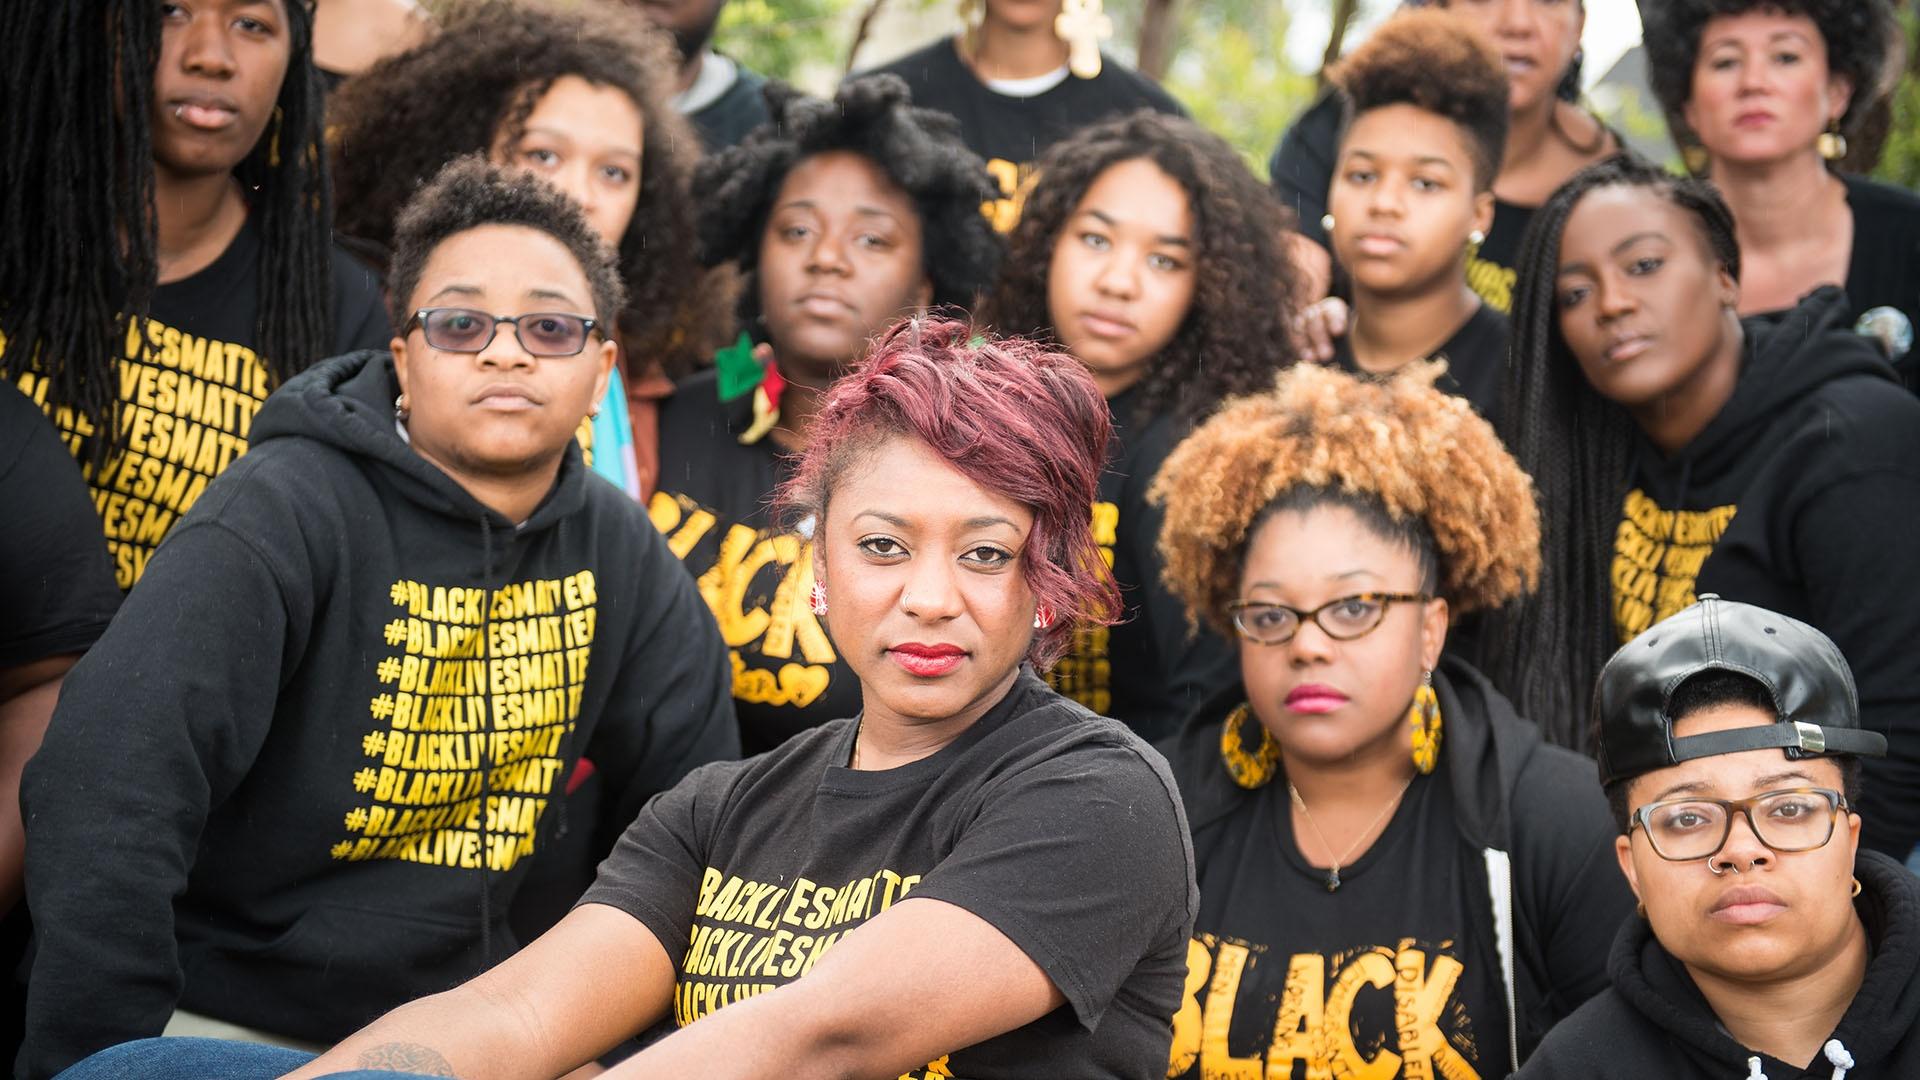 Political strategist and co-founder of Black Lives Matter, Alicia Garza, with fellow activists.